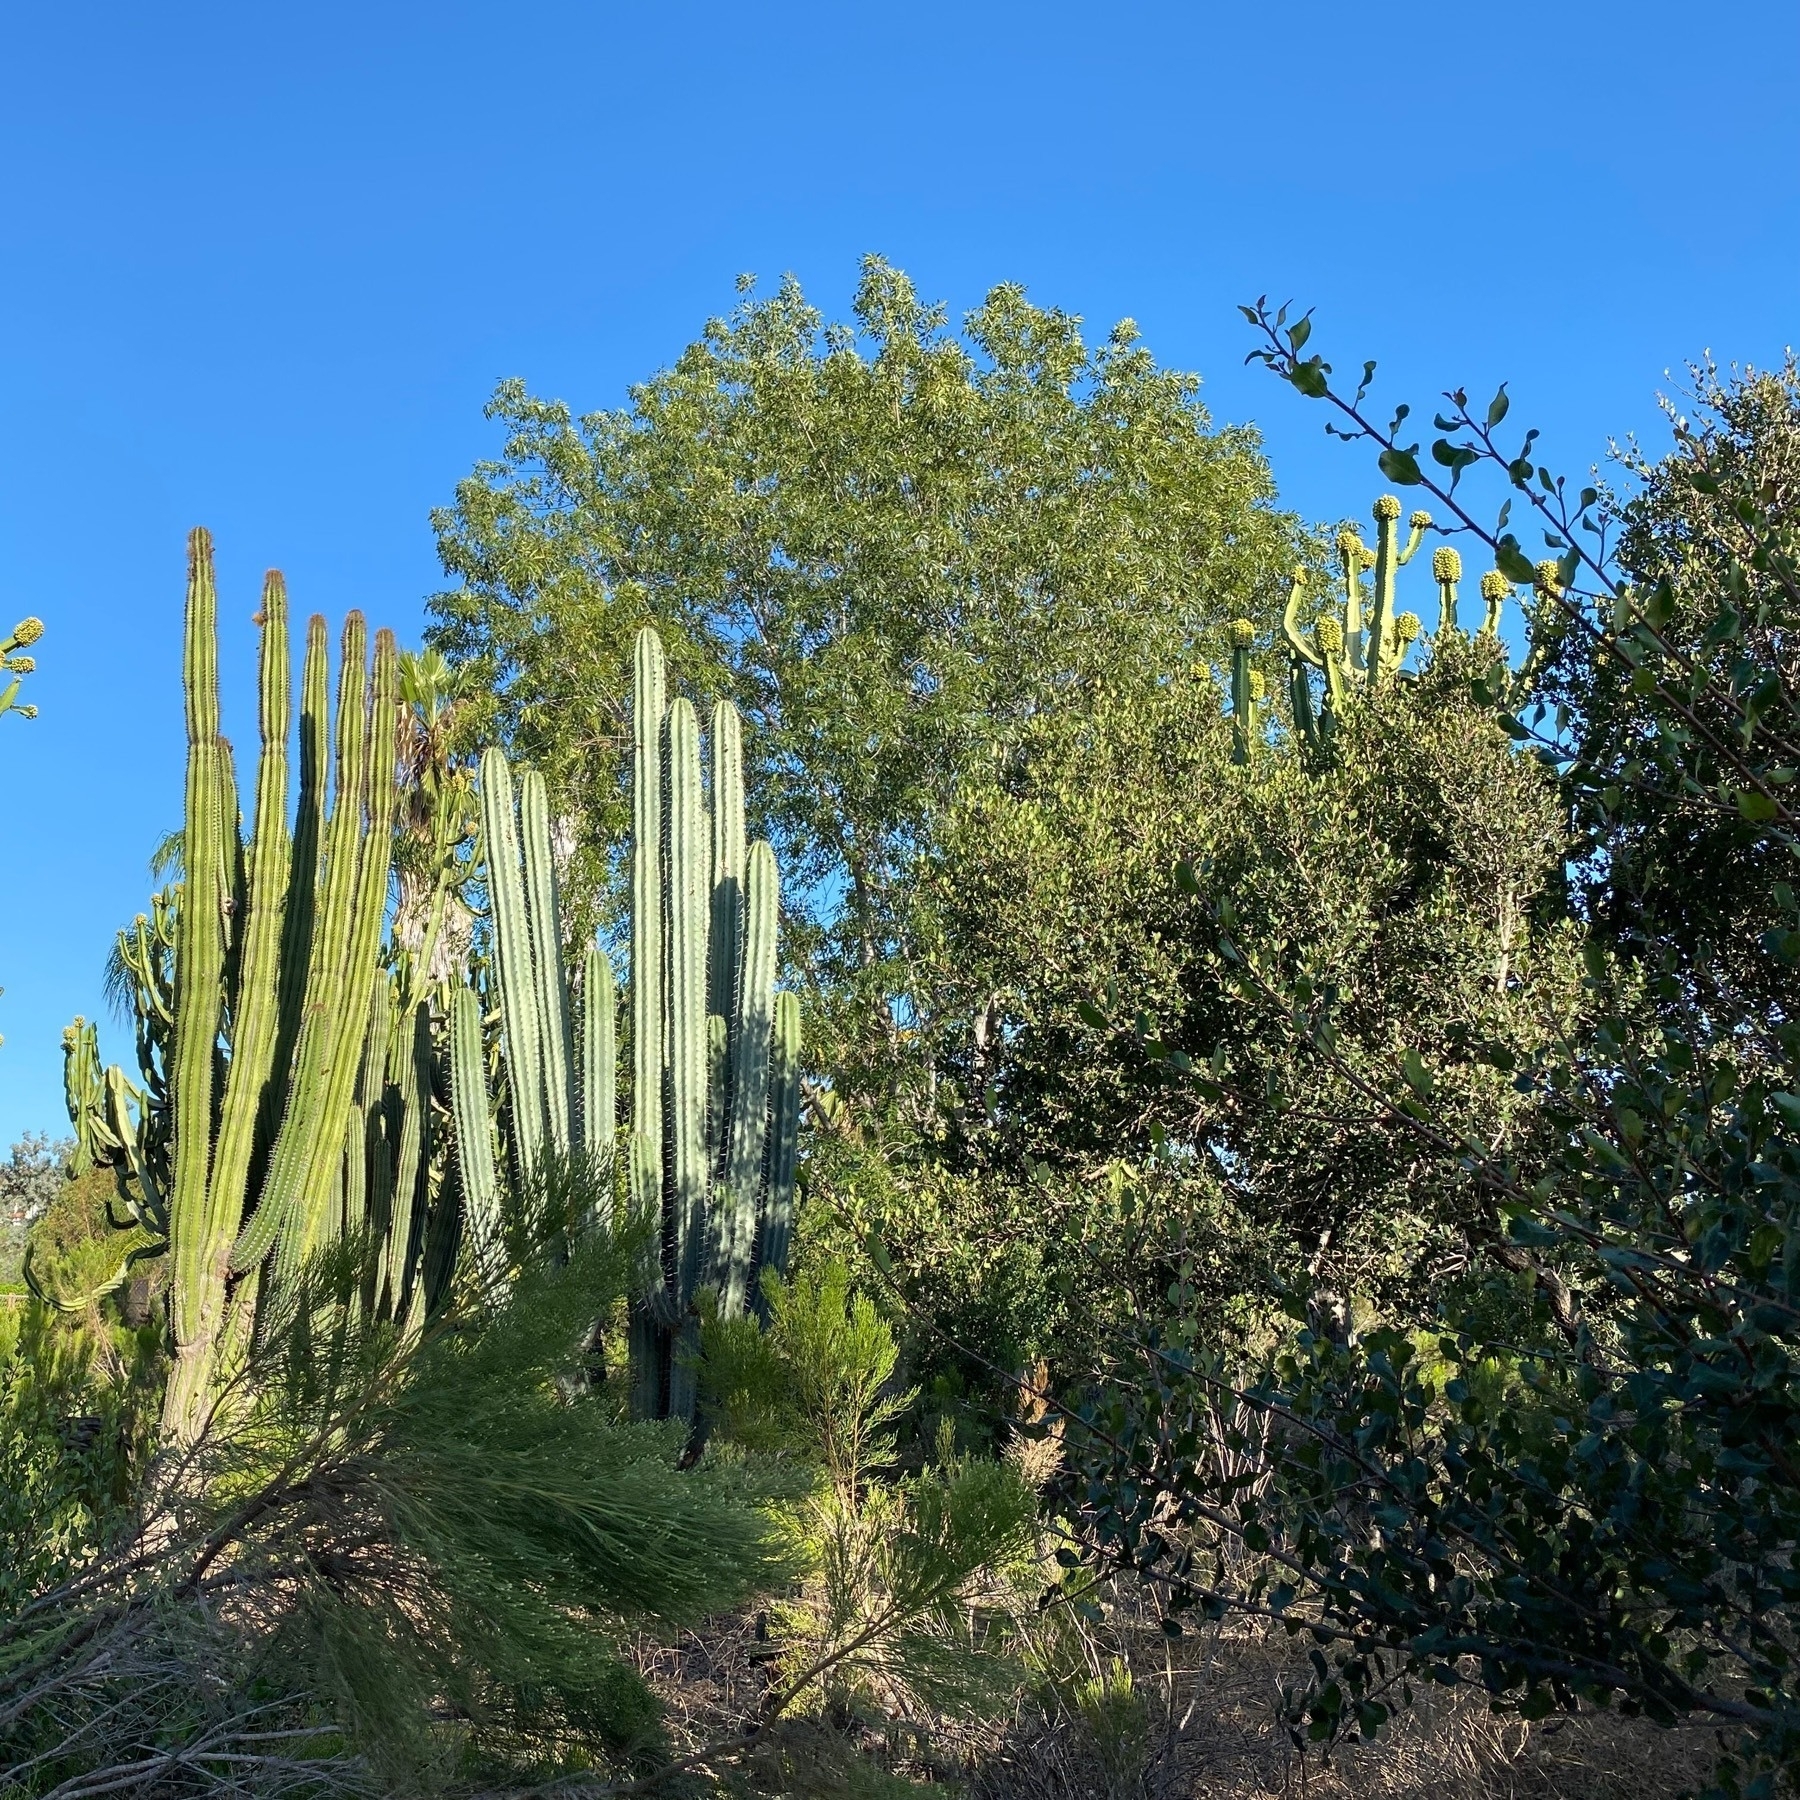 Late afternoon view of trees and cactus with the deep blue sky behind.